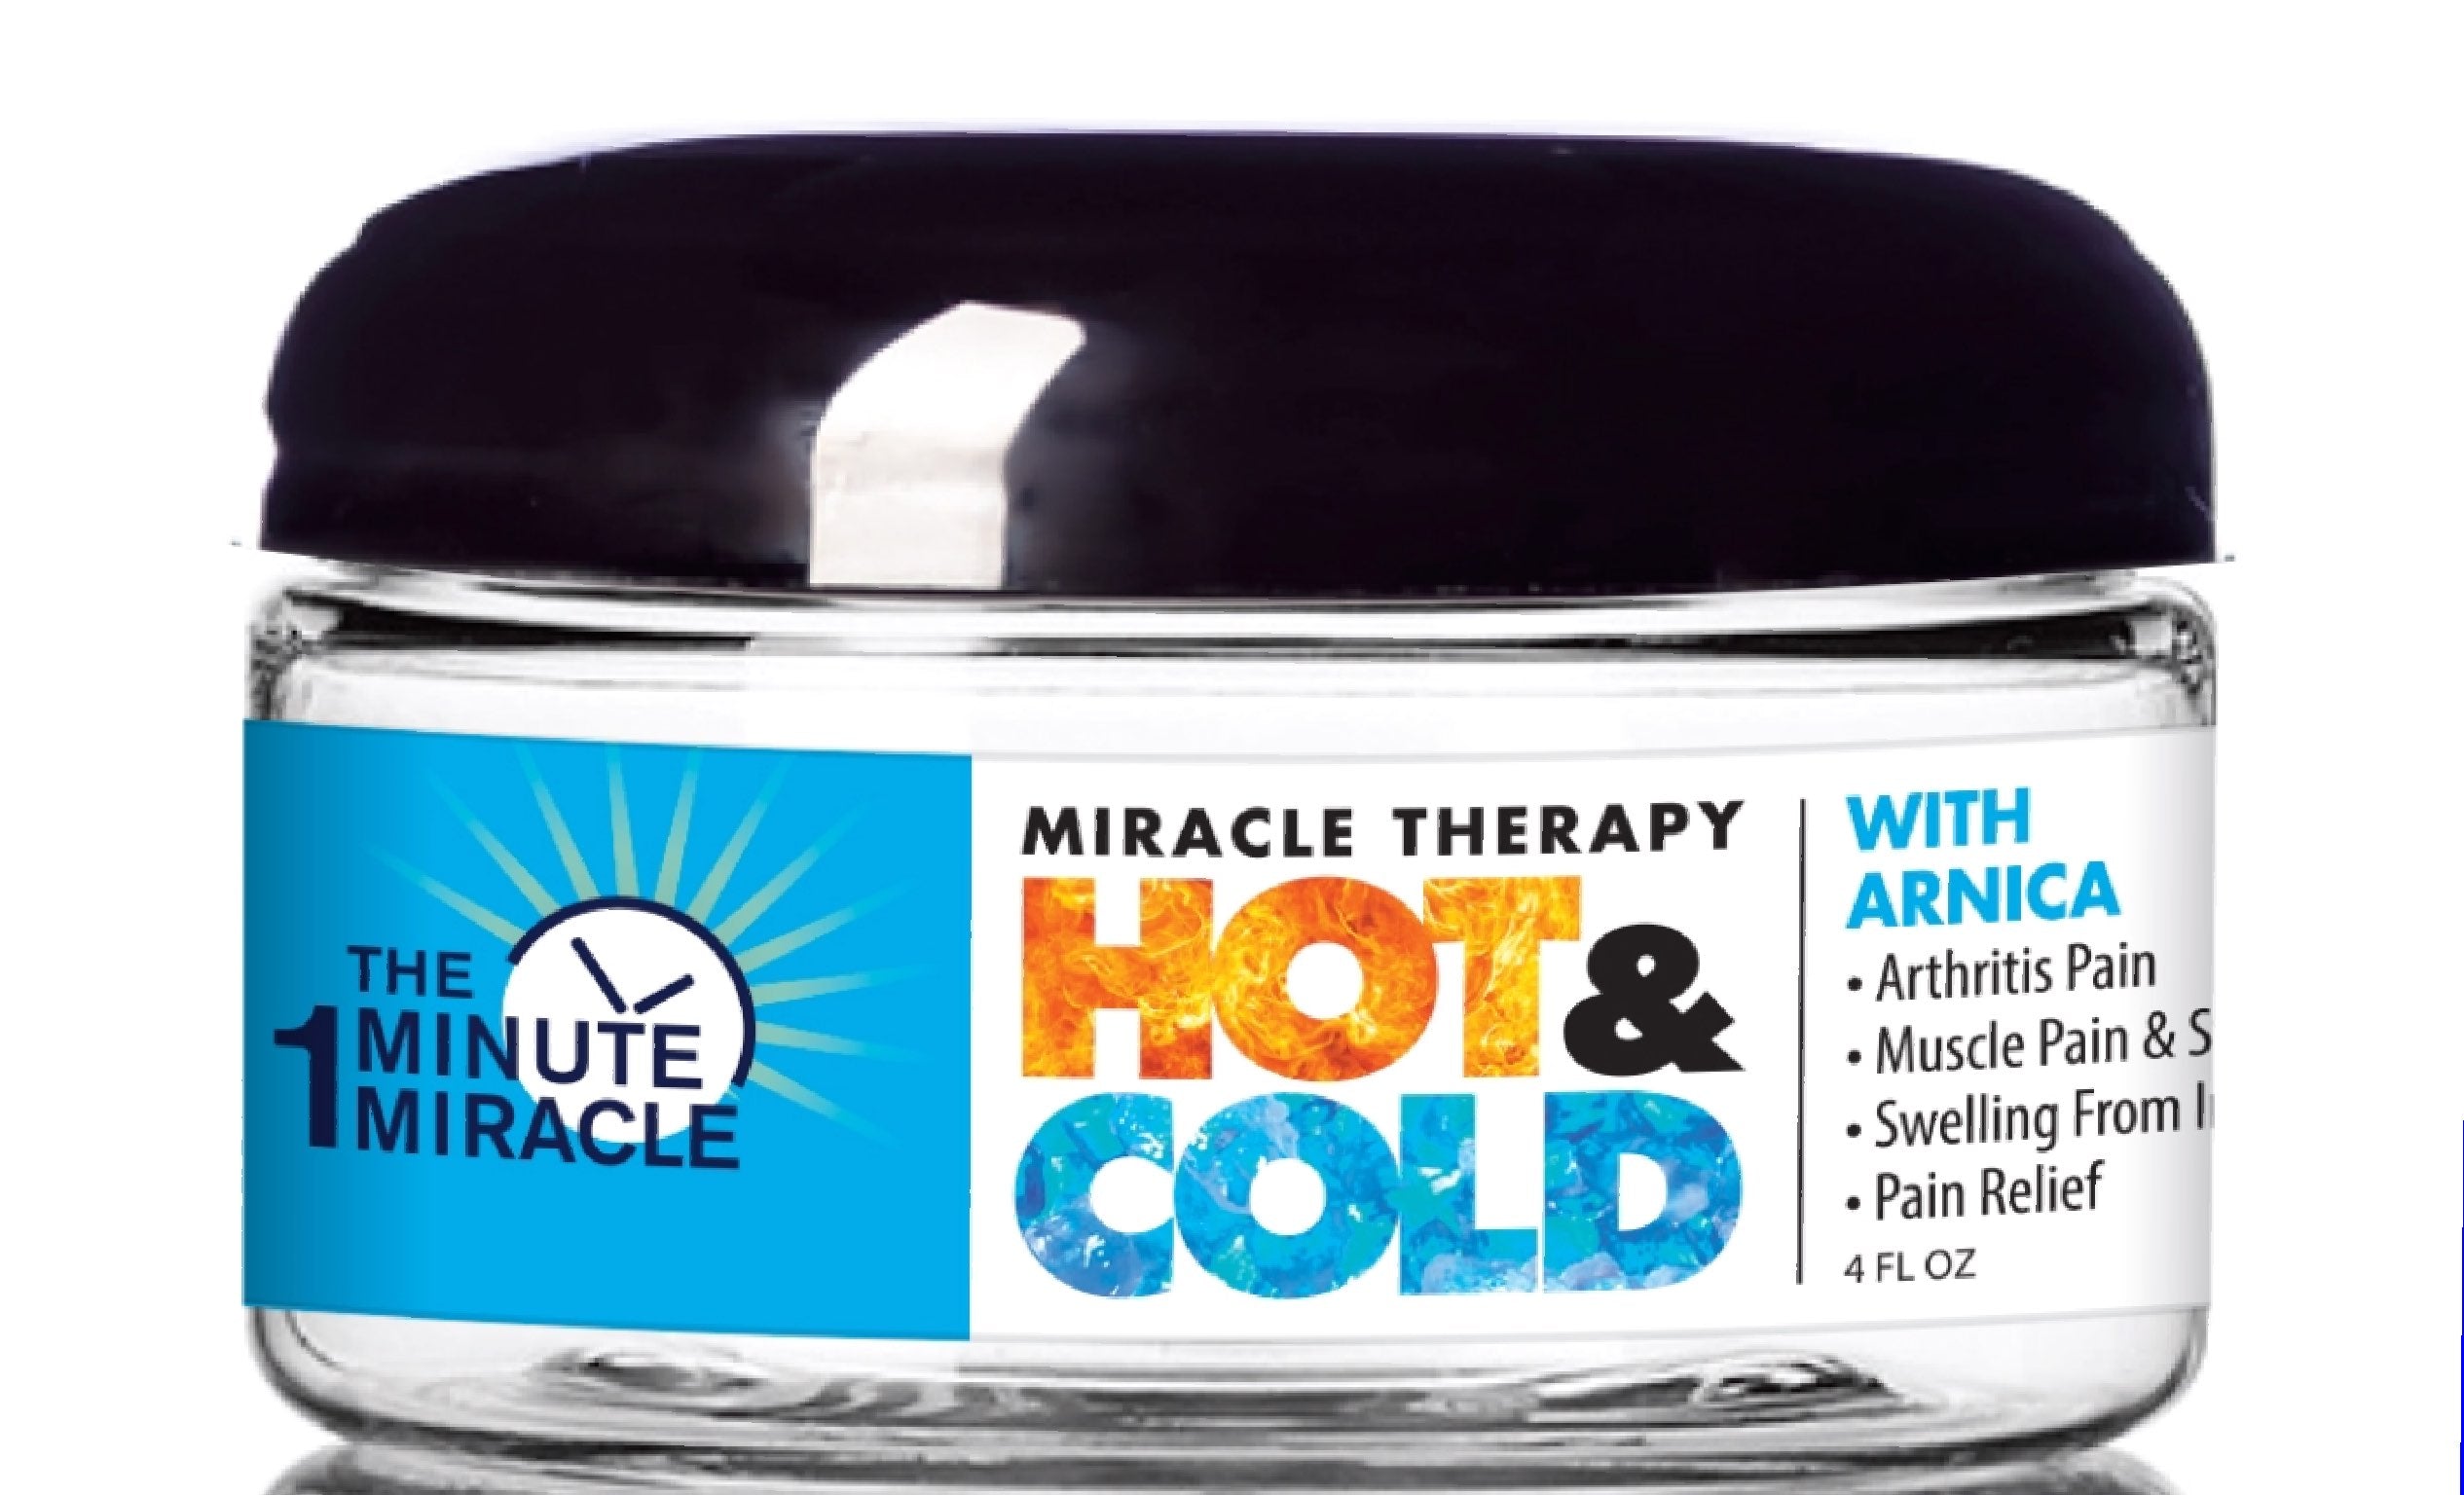 HOT & COLD THERAPY WITH ARNICA